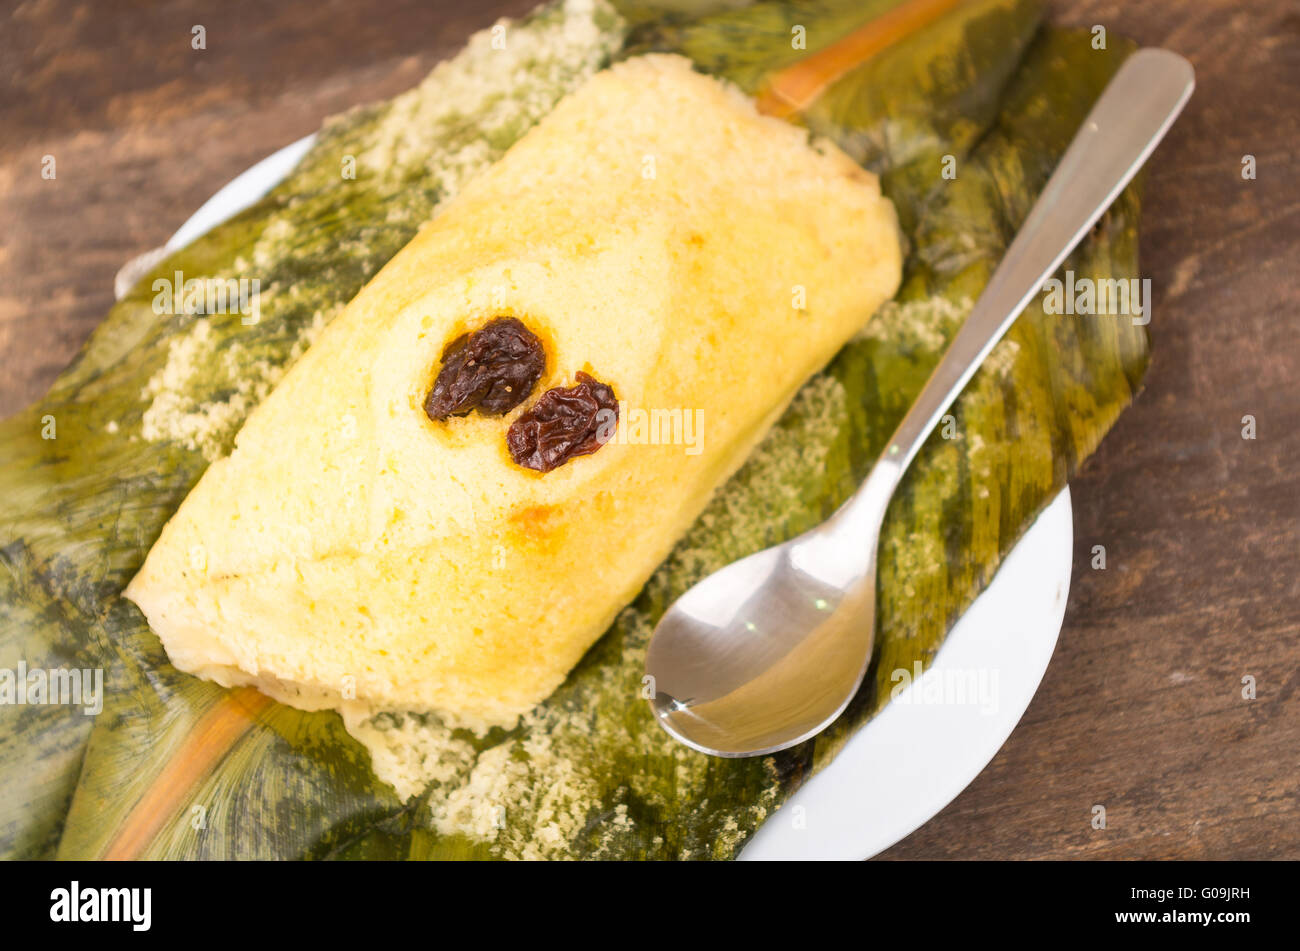 Quimbolito served on white dish ready to be eaten, Ecuador traditions Stock Photo